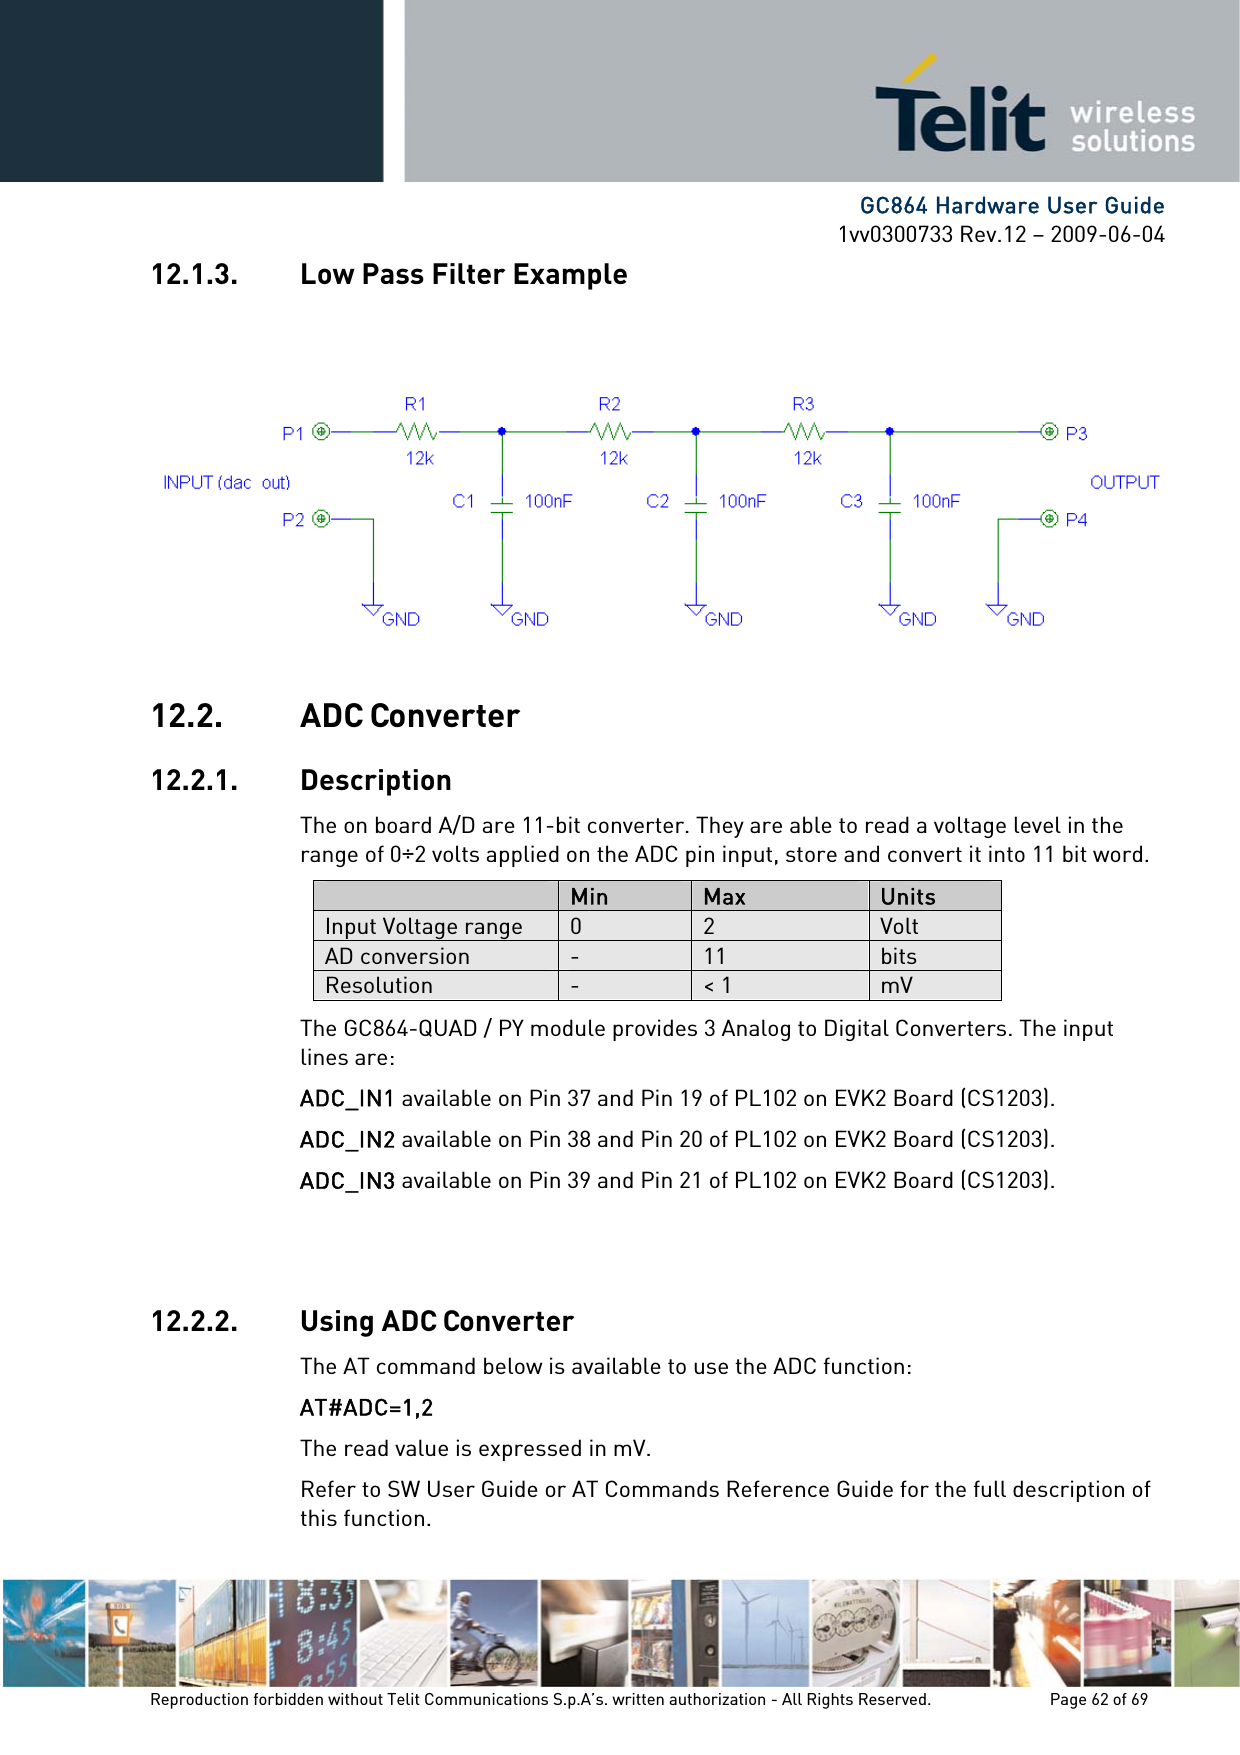      GC864 Hardware User Guide 1vv0300733 Rev.12 – 2009-06-04 12.1.3. Low Pass Filter Example 12.2. ADC Converter 12.2.1. Description The on board A/D are 11-bit converter. They are able to read a voltage level in the range of 0÷2 volts applied on the ADC pin input, store and convert it into 11 bit word.  Min  Max  Units Input Voltage range  0  2  Volt AD conversion  -  11  bits Resolution  -  &lt; 1  mV The GC864-QUAD / PY module provides 3 Analog to Digital Converters. The input lines are: ADC_IN1 available on Pin 37 and Pin 19 of PL102 on EVK2 Board (CS1203). ADC_IN2 available on Pin 38 and Pin 20 of PL102 on EVK2 Board (CS1203). ADC_IN3 available on Pin 39 and Pin 21 of PL102 on EVK2 Board (CS1203).   12.2.2. Using ADC Converter The AT command below is available to use the ADC function: AT#ADC=1,2 The read value is expressed in mV. Refer to SW User Guide or AT Commands Reference Guide for the full description of this function. Reproduction forbidden without Telit Communications S.p.A’s. written authorization - All Rights Reserved.    Page 62 of 69  